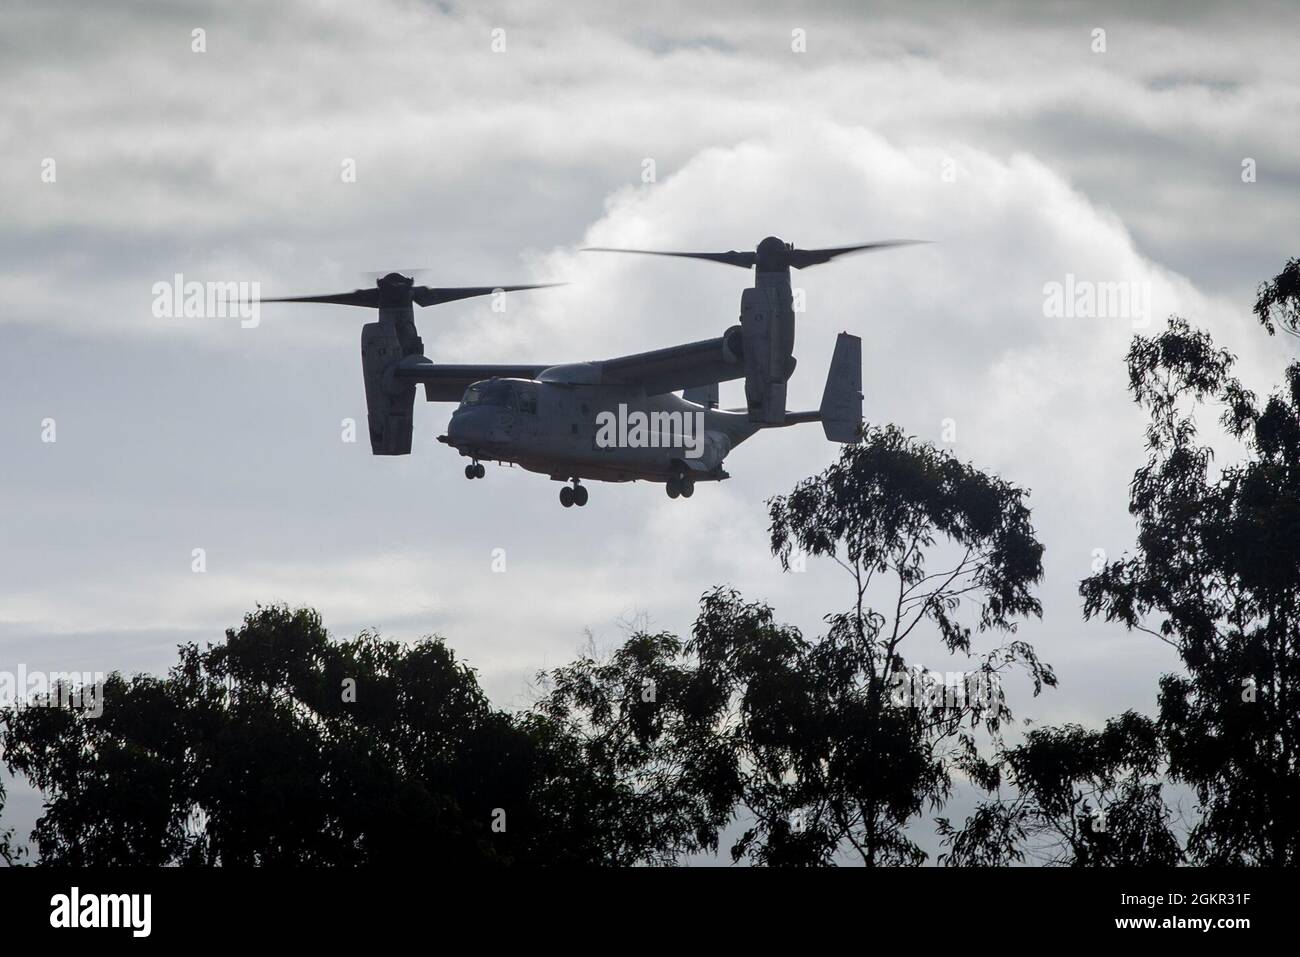 U.S. Marines with Marine Medium Tiltrotor Squadron 363 (Reinforced), Marine Rotational Force - Darwin land an MV-22B Osprey at Gove Airport in Nhulunbuy, NT, Australia, June 17, 2021. Marines redeployed from Nhulunbuy to Darwin on MV-22B Ospreys after the successful completion of Exercise Darrandarra. Darrandarra, meaning “together,” demonstrates the Marines Corps’ ability to operate with the Australian Defence Force and reinforce embassies and conduct noncombatant evacuation operations in response to crises and contingencies in the Indo-Pacific region. Stock Photo